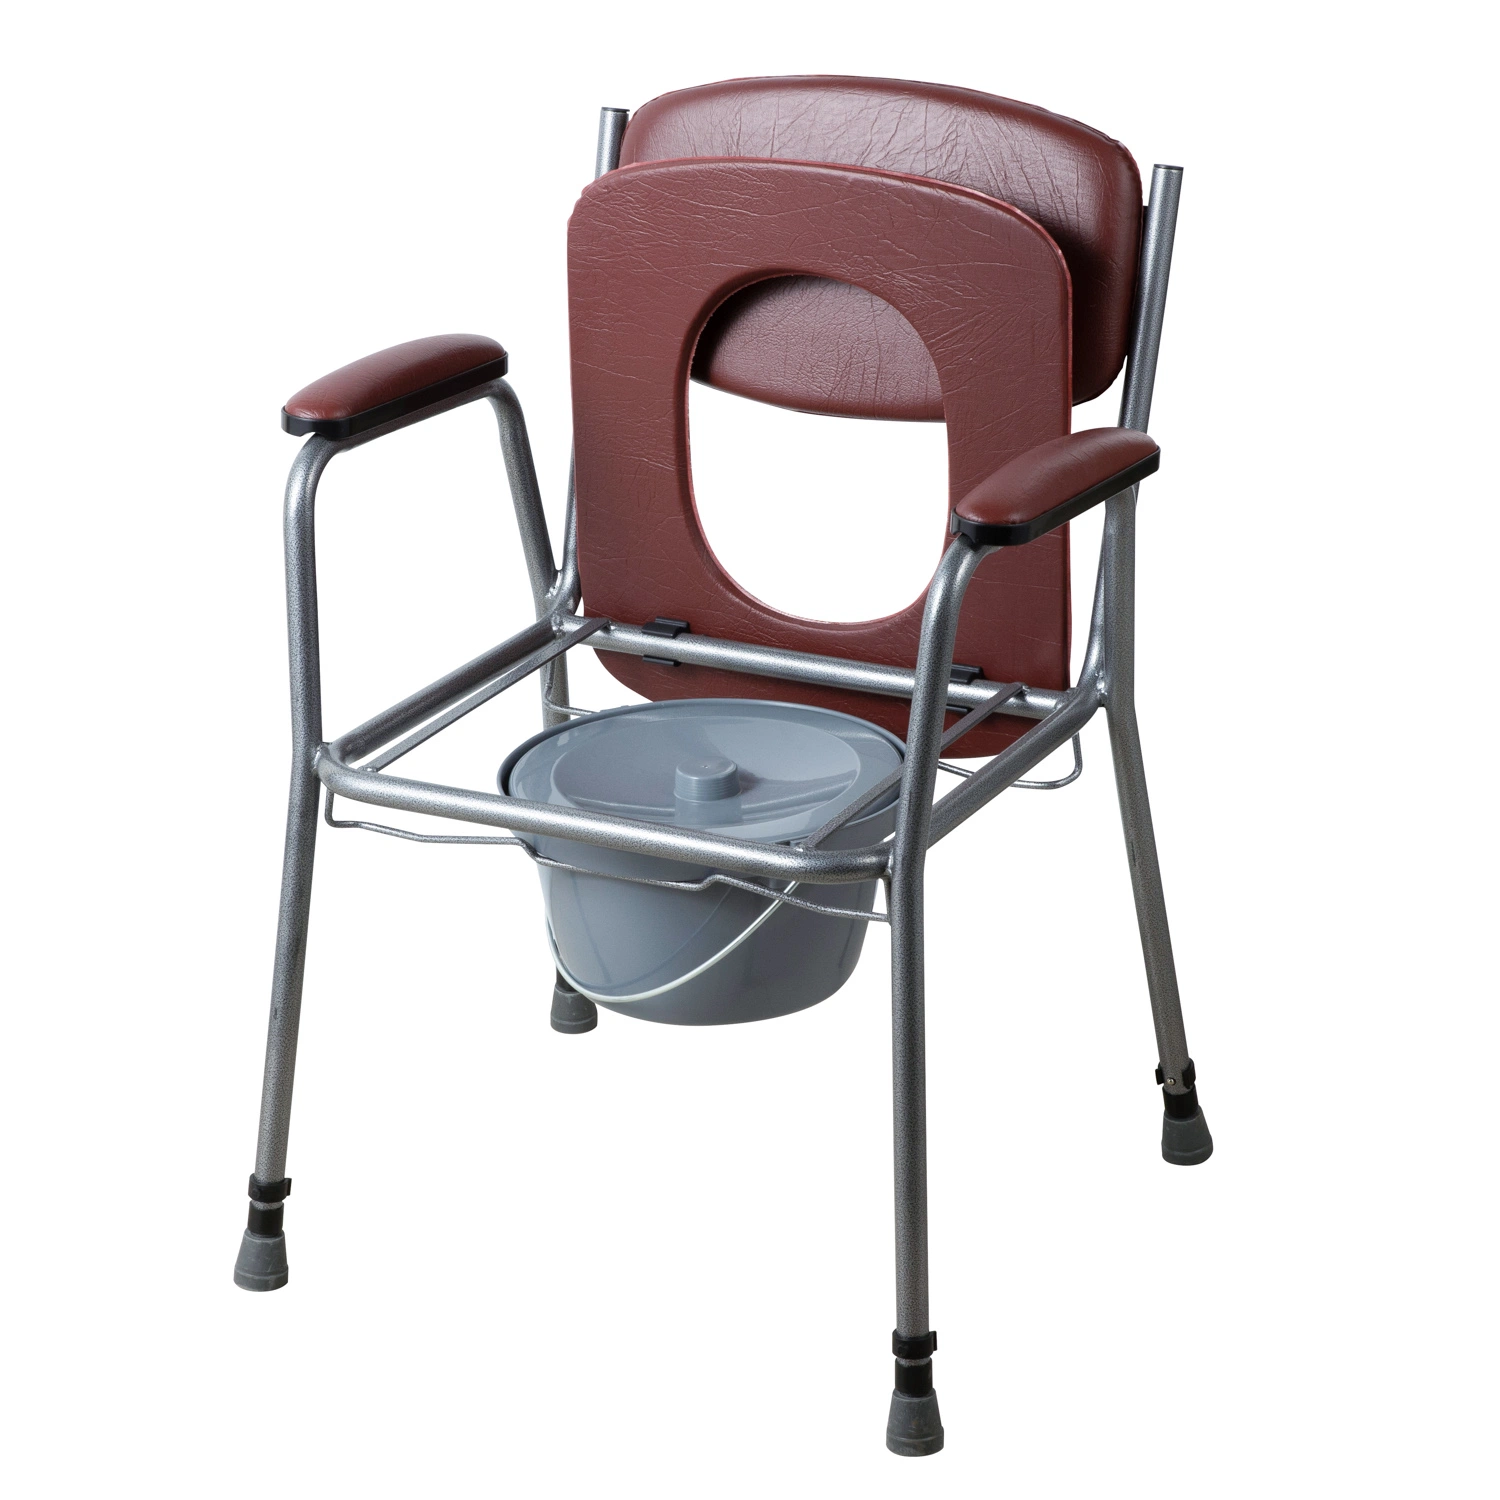 Commode Chair Paitent Chair Toilet Aids Chair